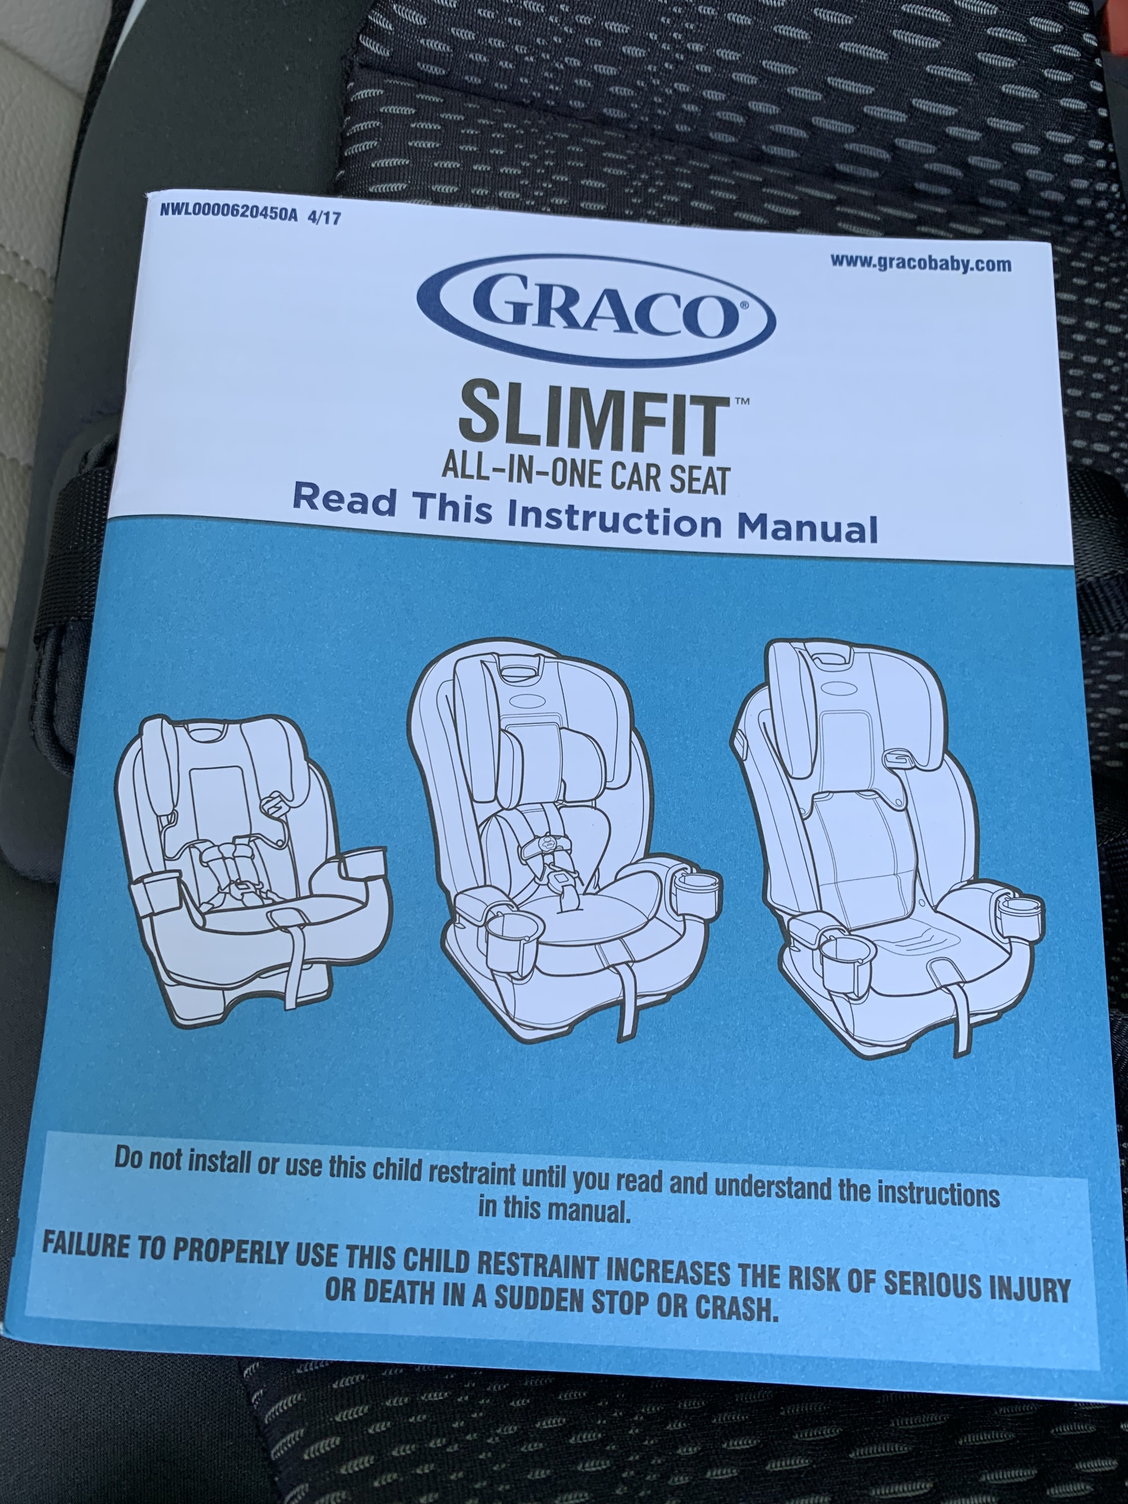 GRACO SLIM FIT 3 in 1 CAR SEAT CLEANING // EXTREME TODDLER CAR